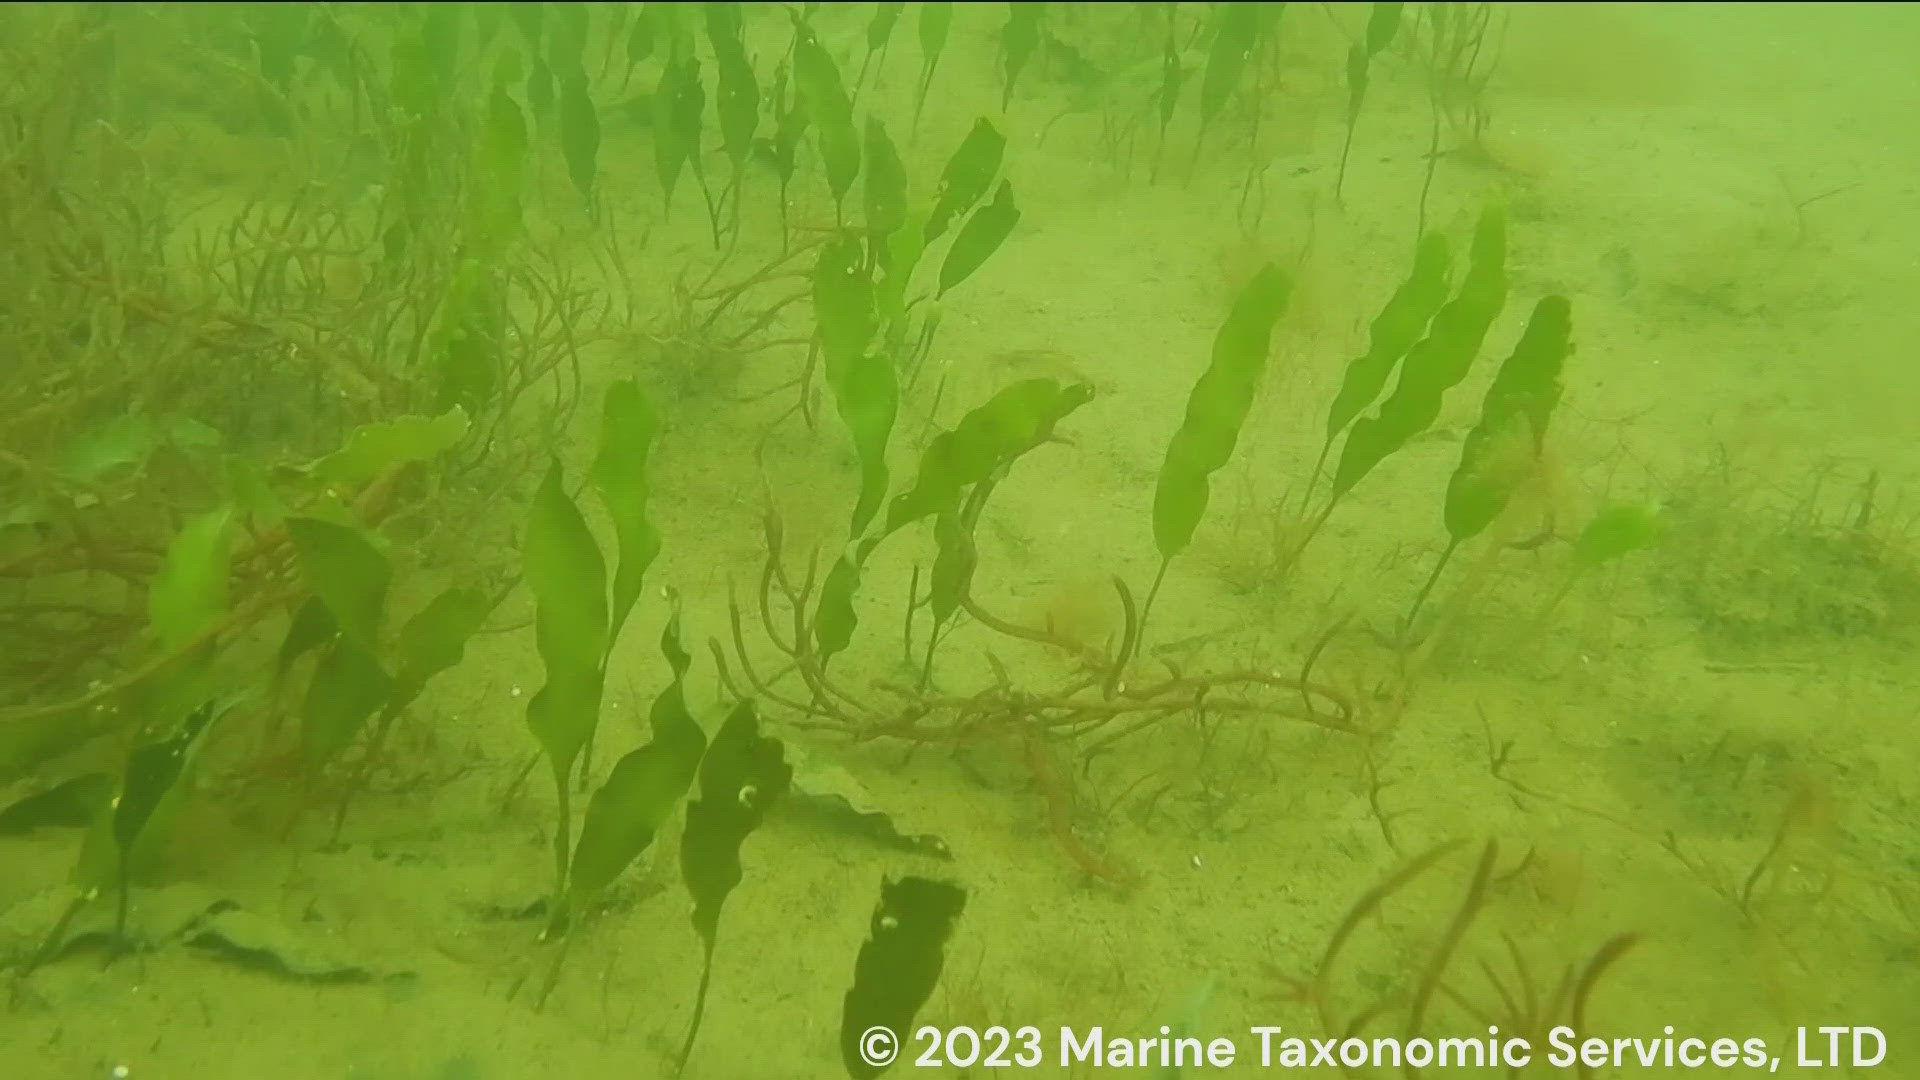 The algae, Caulerpa prolifera, was discovered in the bay in September 2023 and additional patches have been found near Coronado Cays.